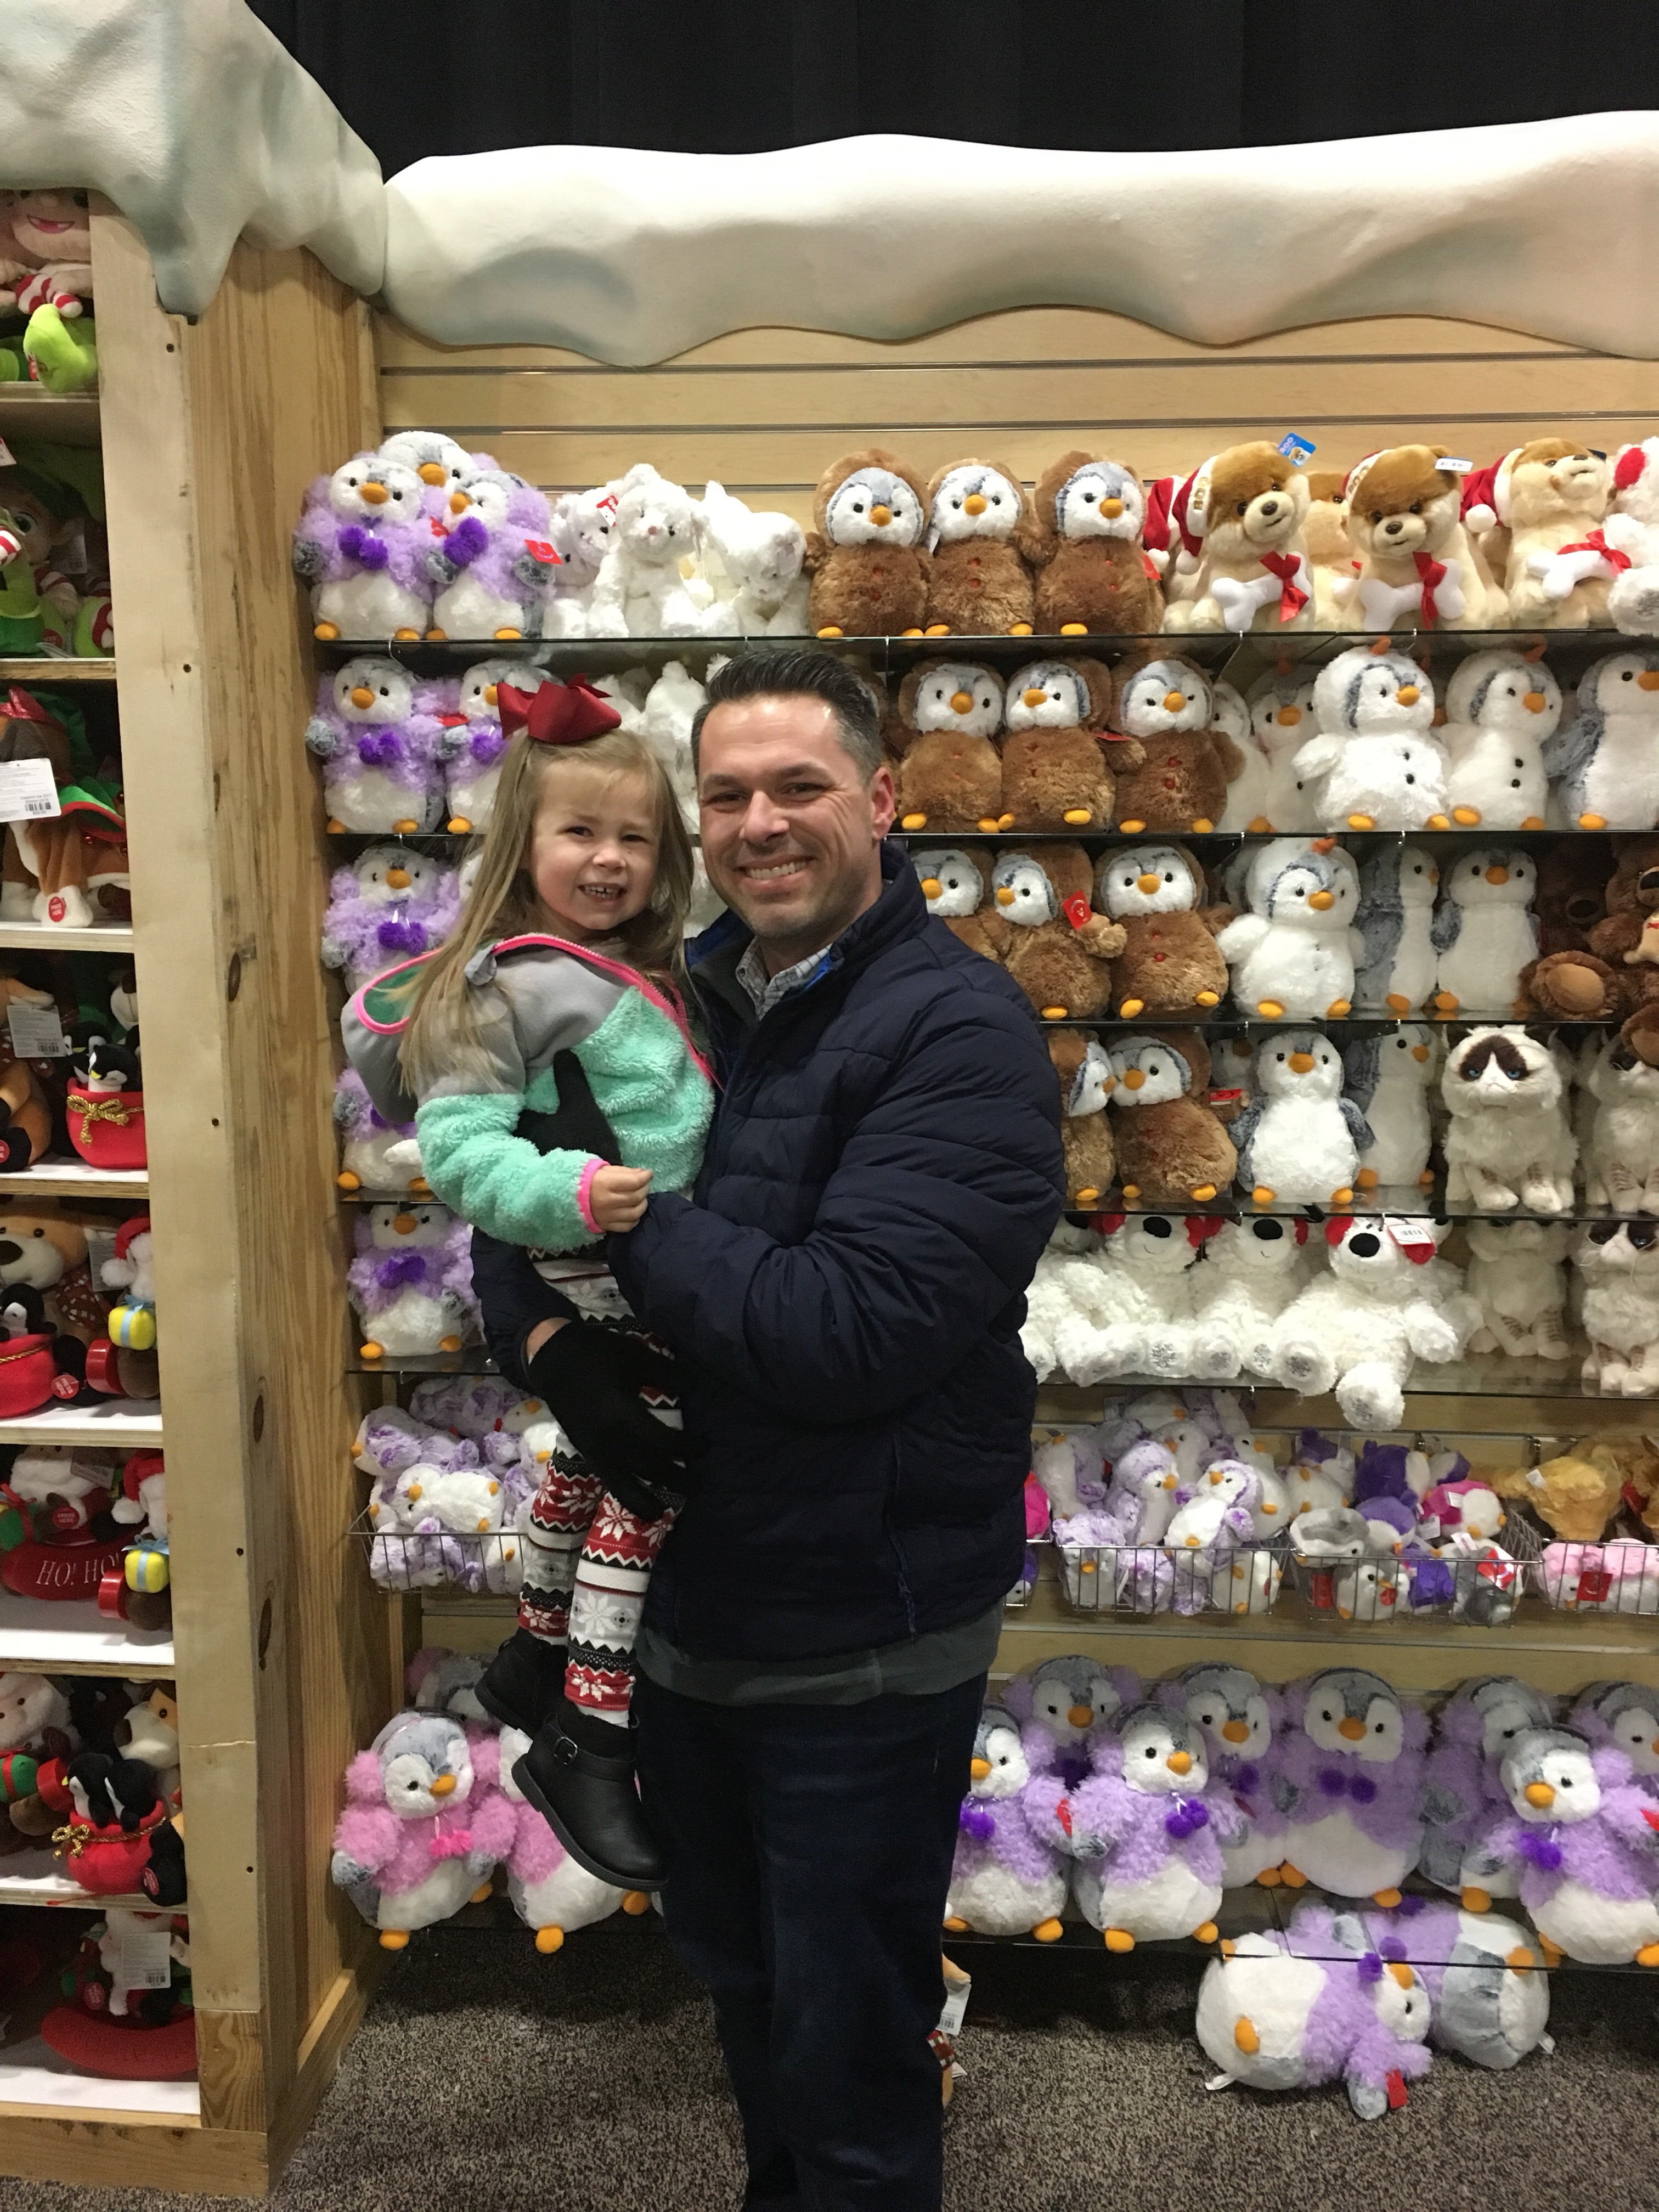 dad & daughter in front of stuffed animals